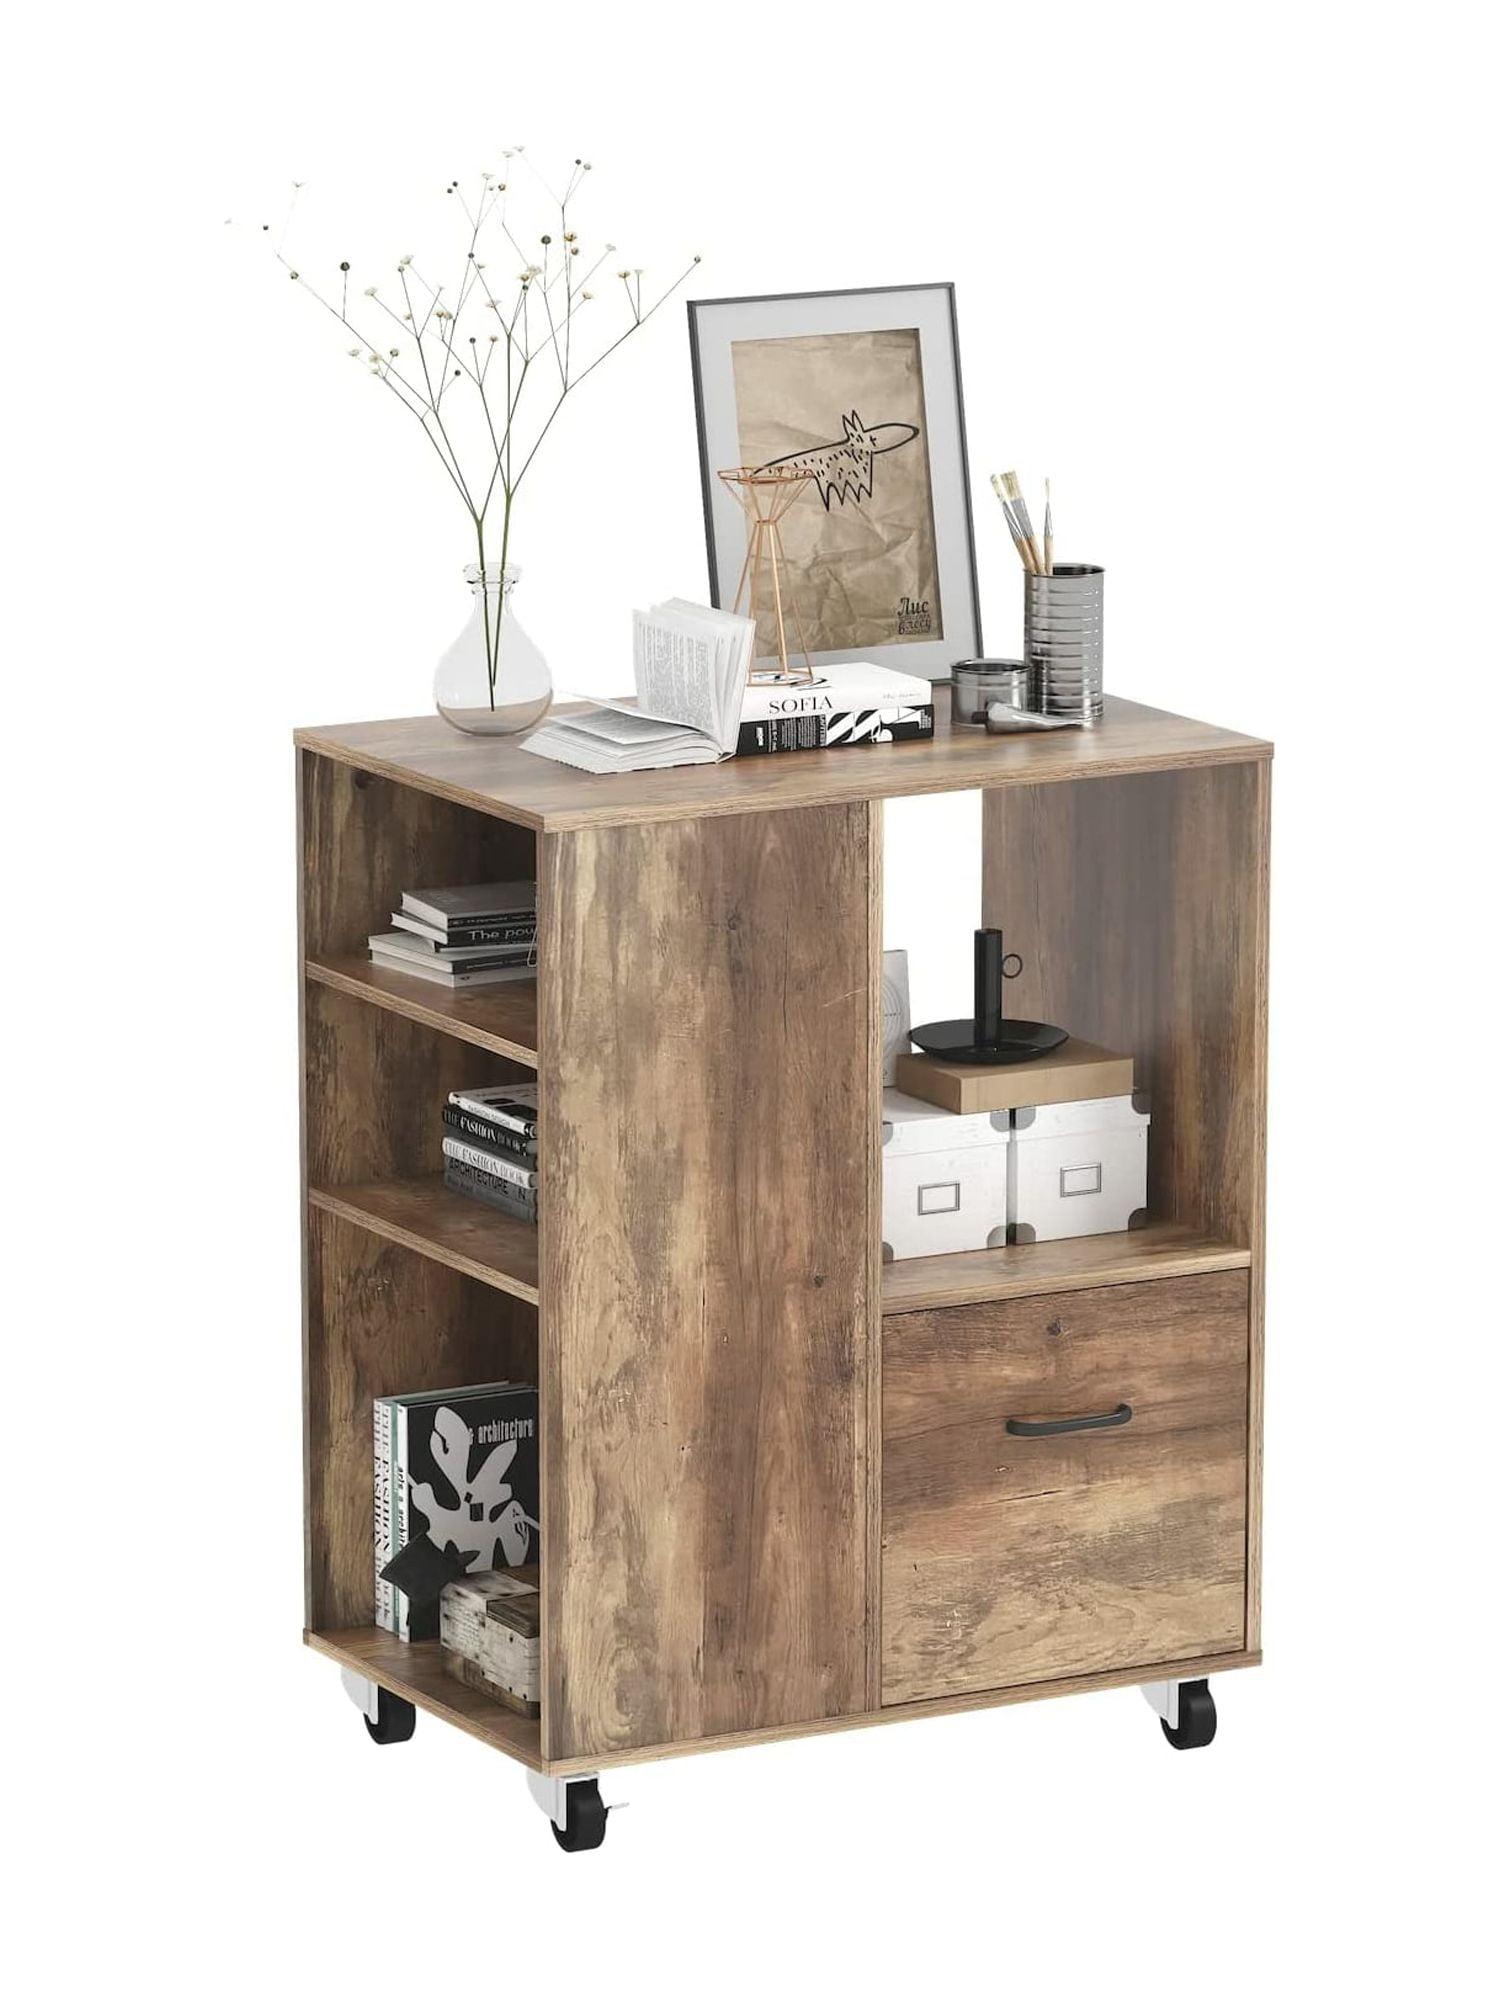 Mobile Brown Wood Office Storage Cabinet with Shelves and Drawer